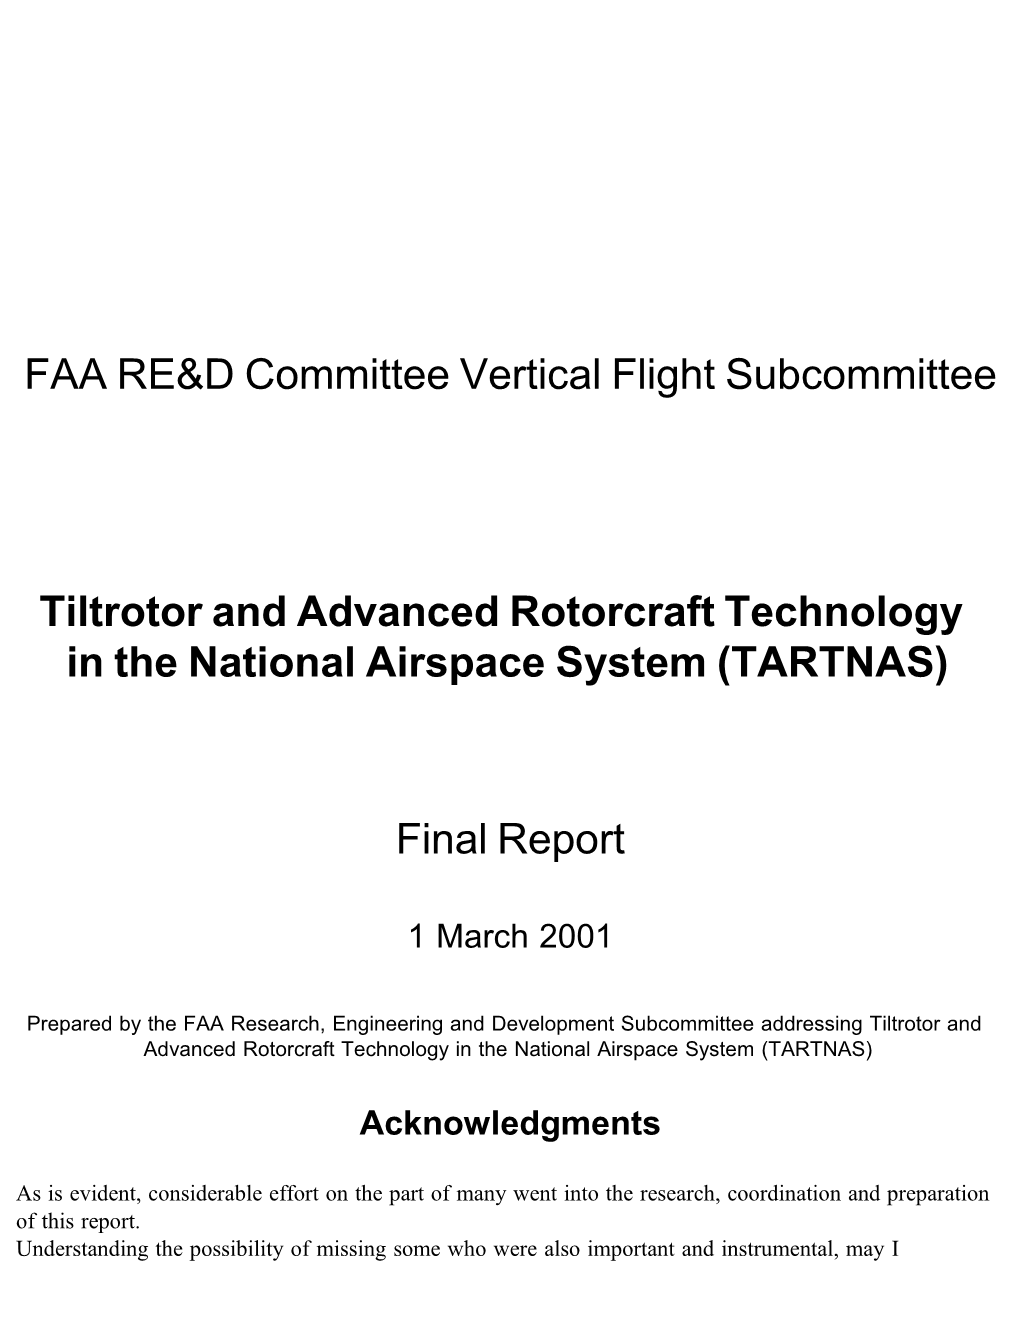 Tiltrotor and Advanced Rotorcraft Technology in the National Airspace System (TARTNAS)